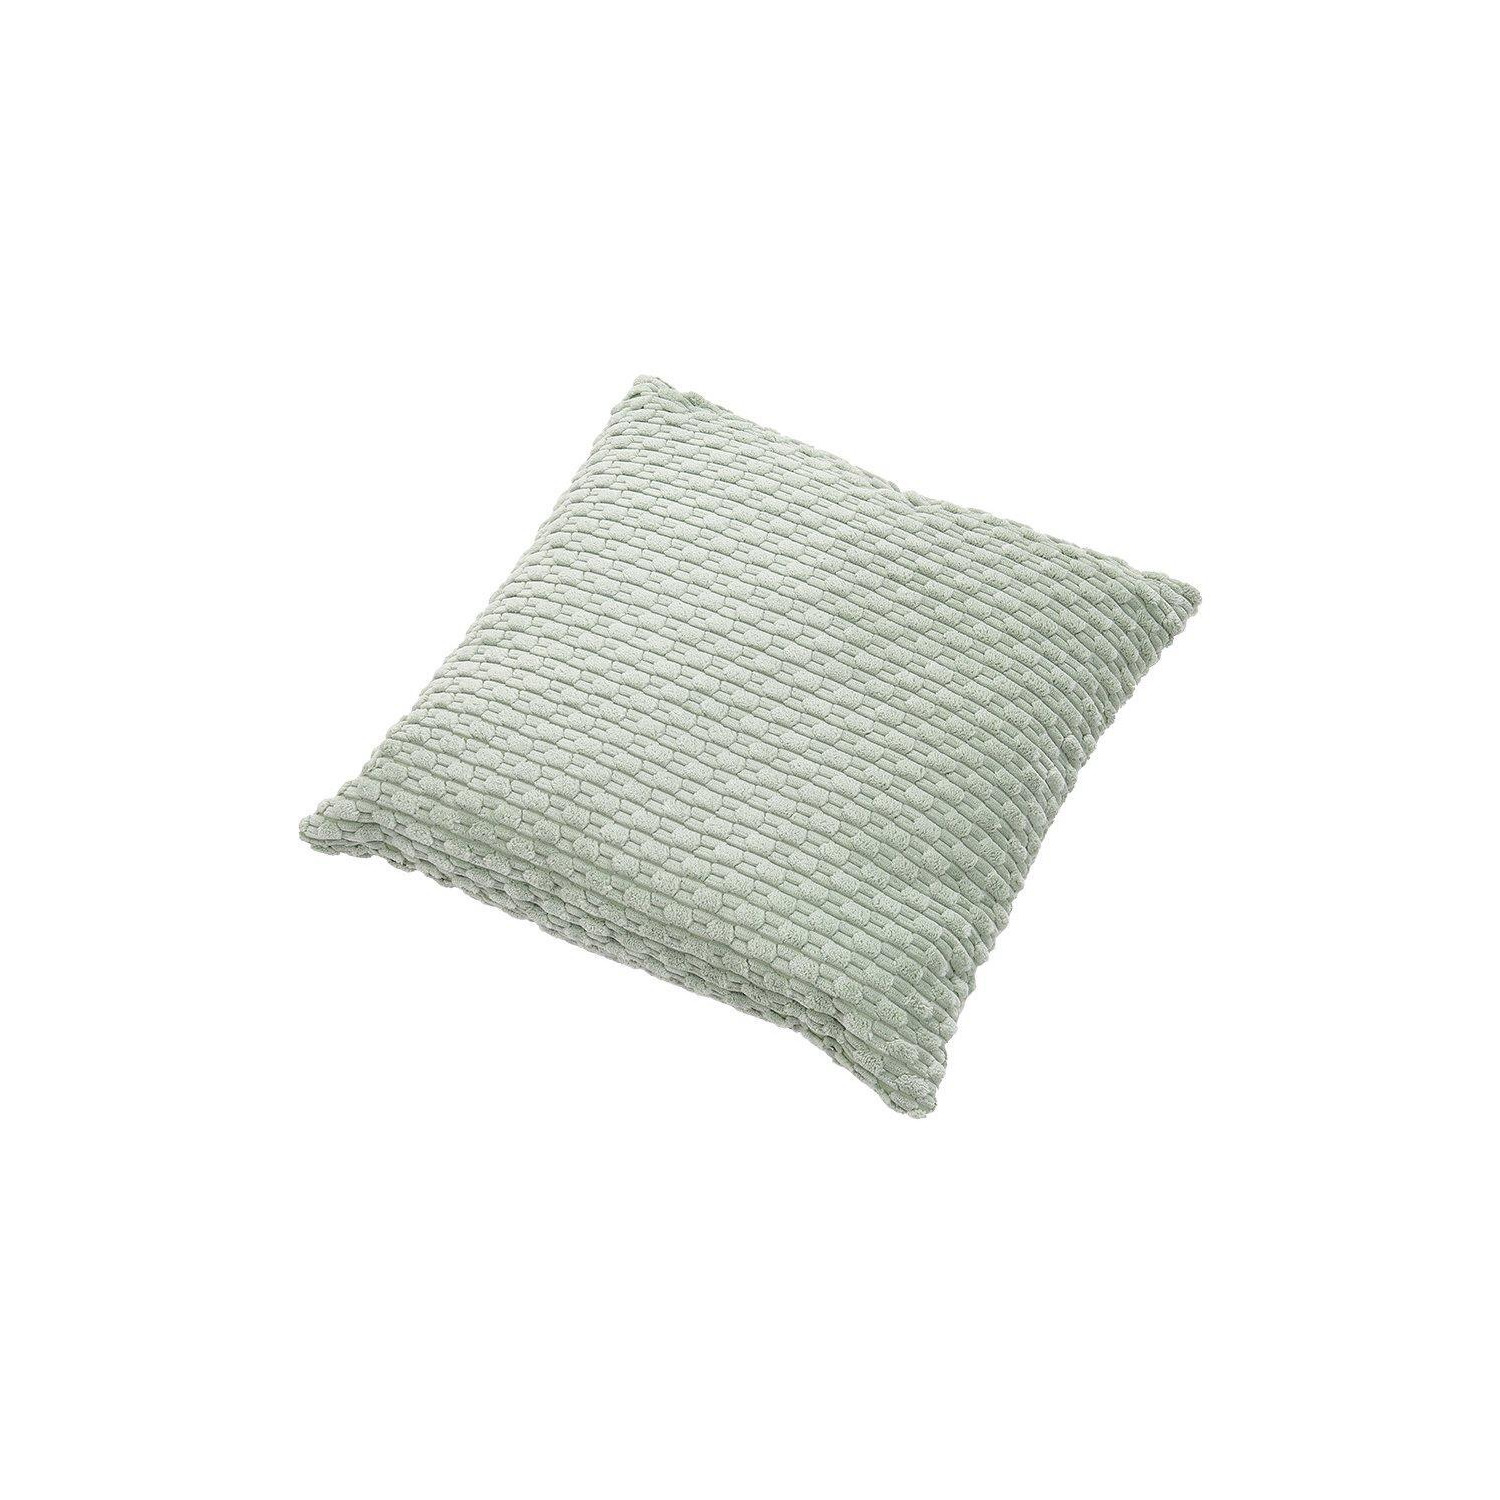 Corduroy Throw Pillow with Pillow Insert - image 1